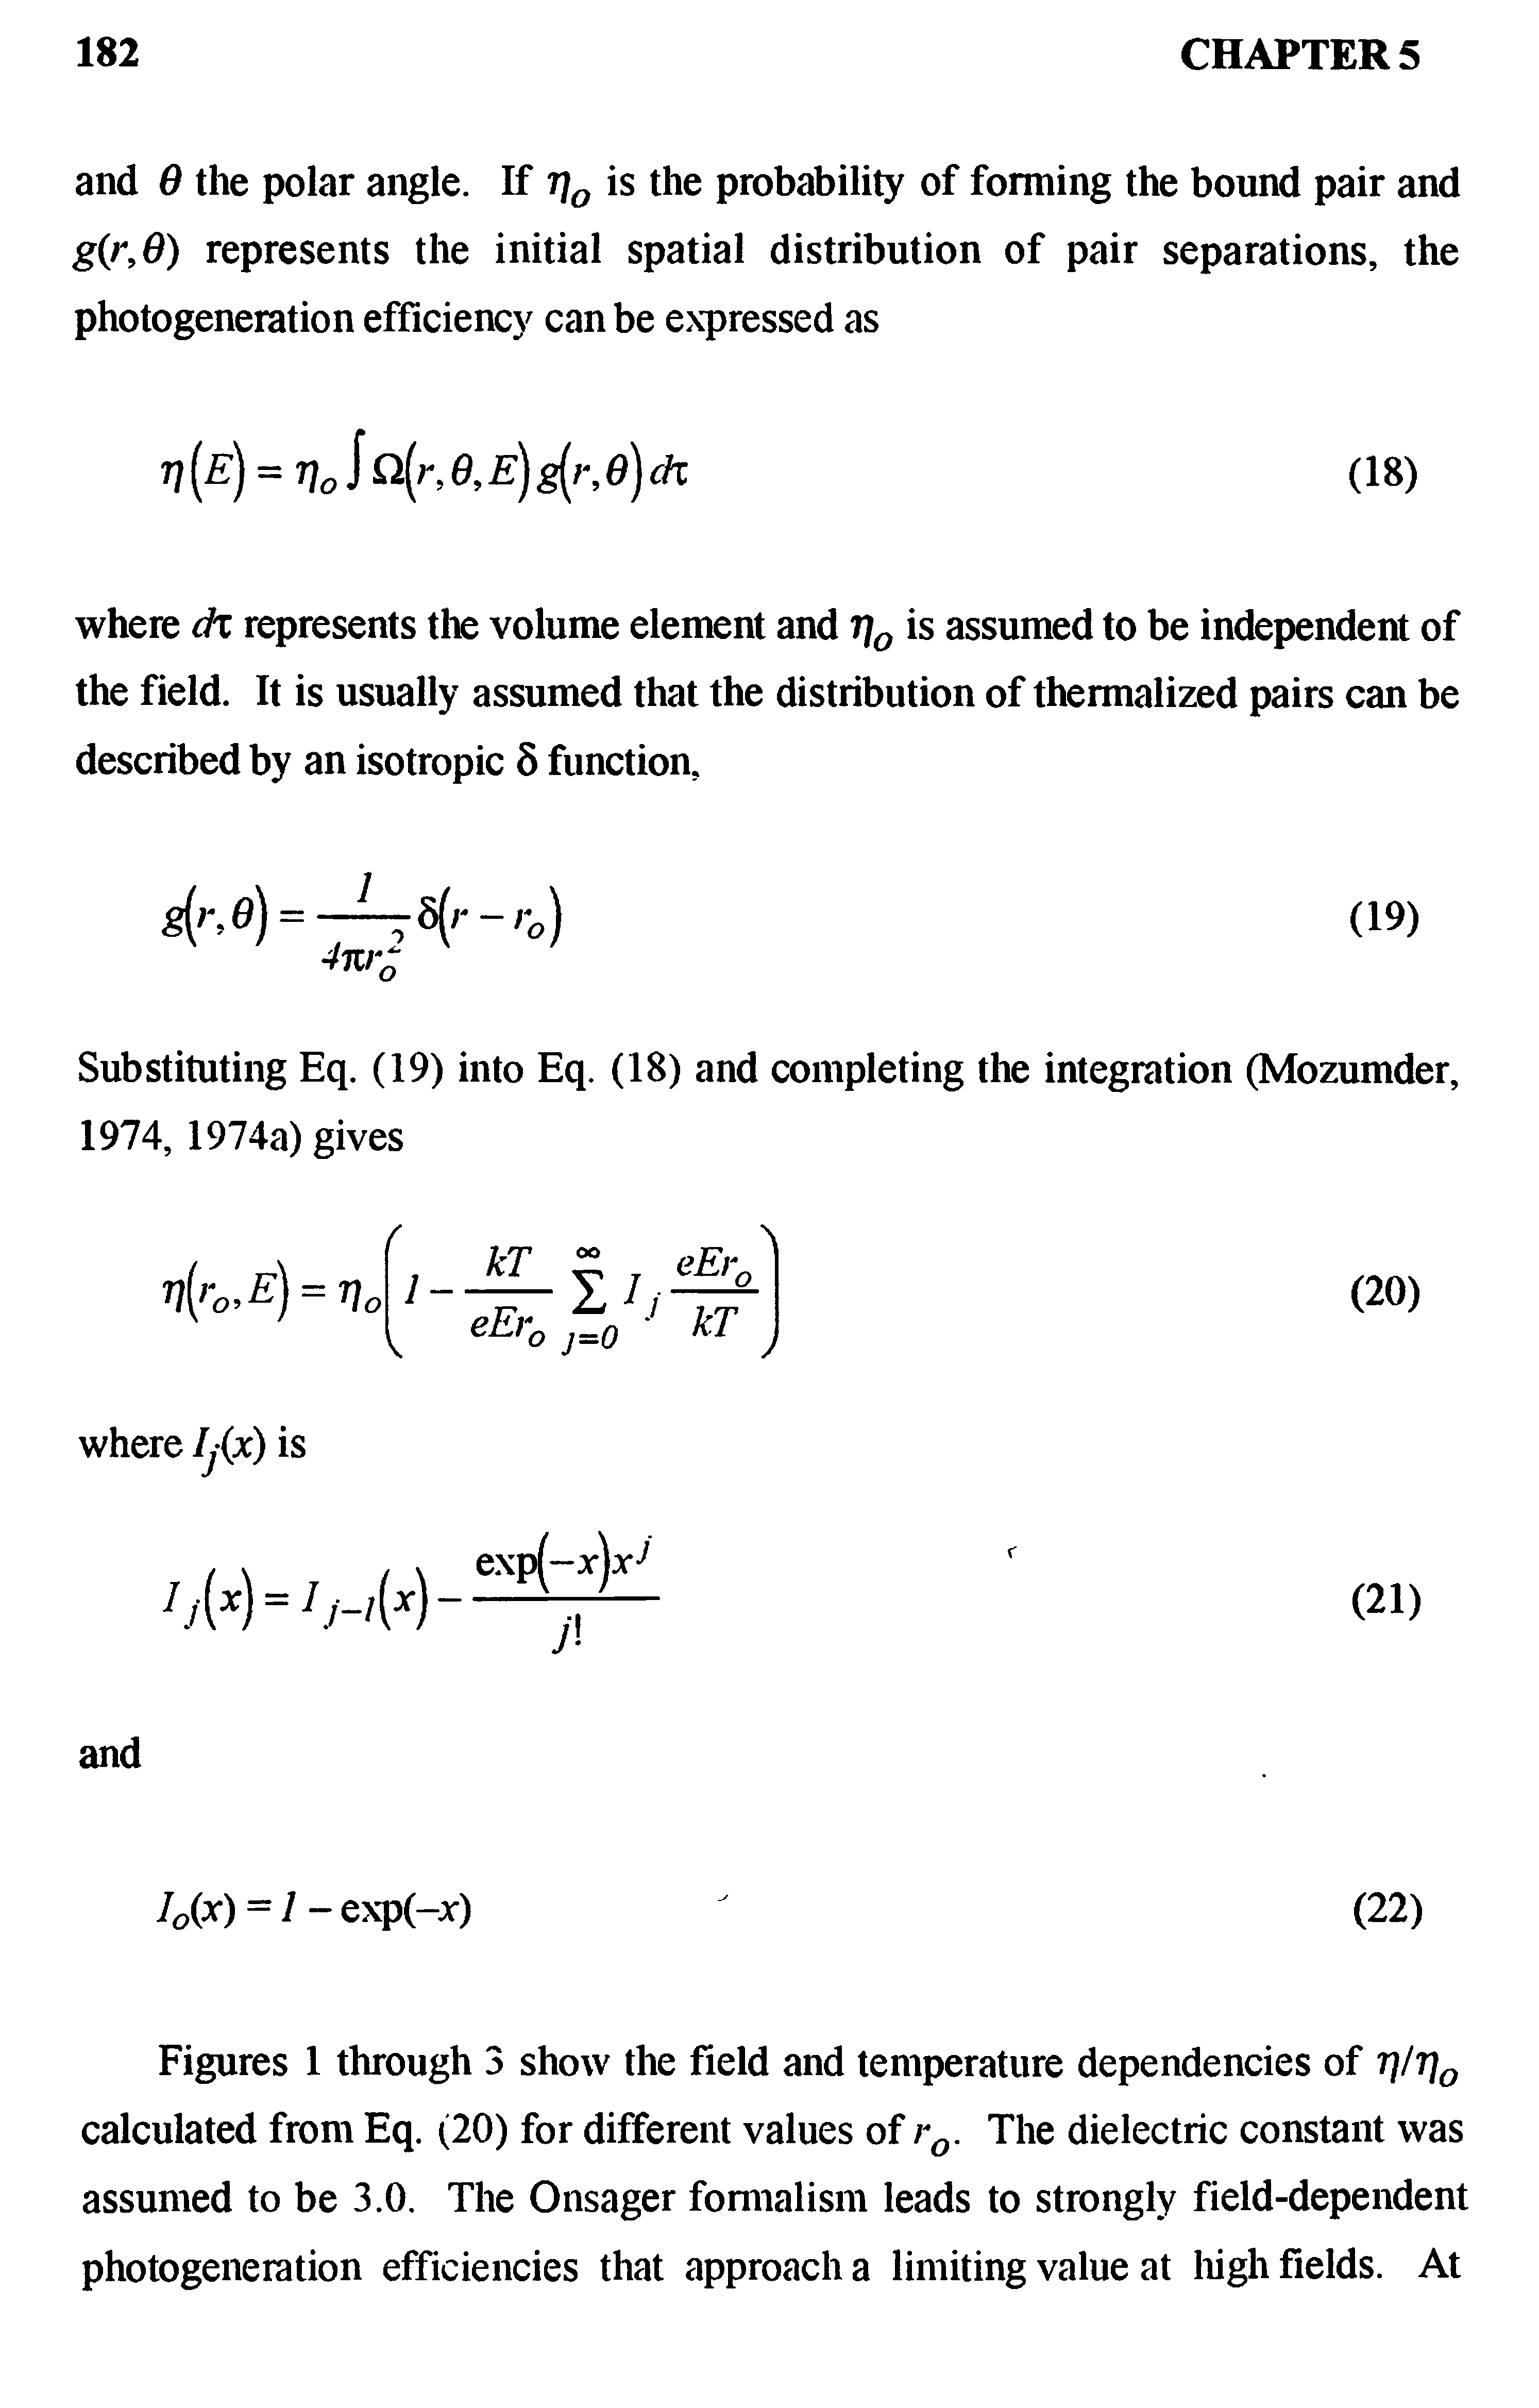 Figures 1 through 3 show the field and temperature dependencies of r]/7]0 calculated from Eq. (20) for different values of rQ. The dielectric constant was assumed to be 3.0. The Onsager formalism leads to strongly field-dependent photogeneration efficiencies that approach a limiting value at high fields. At...